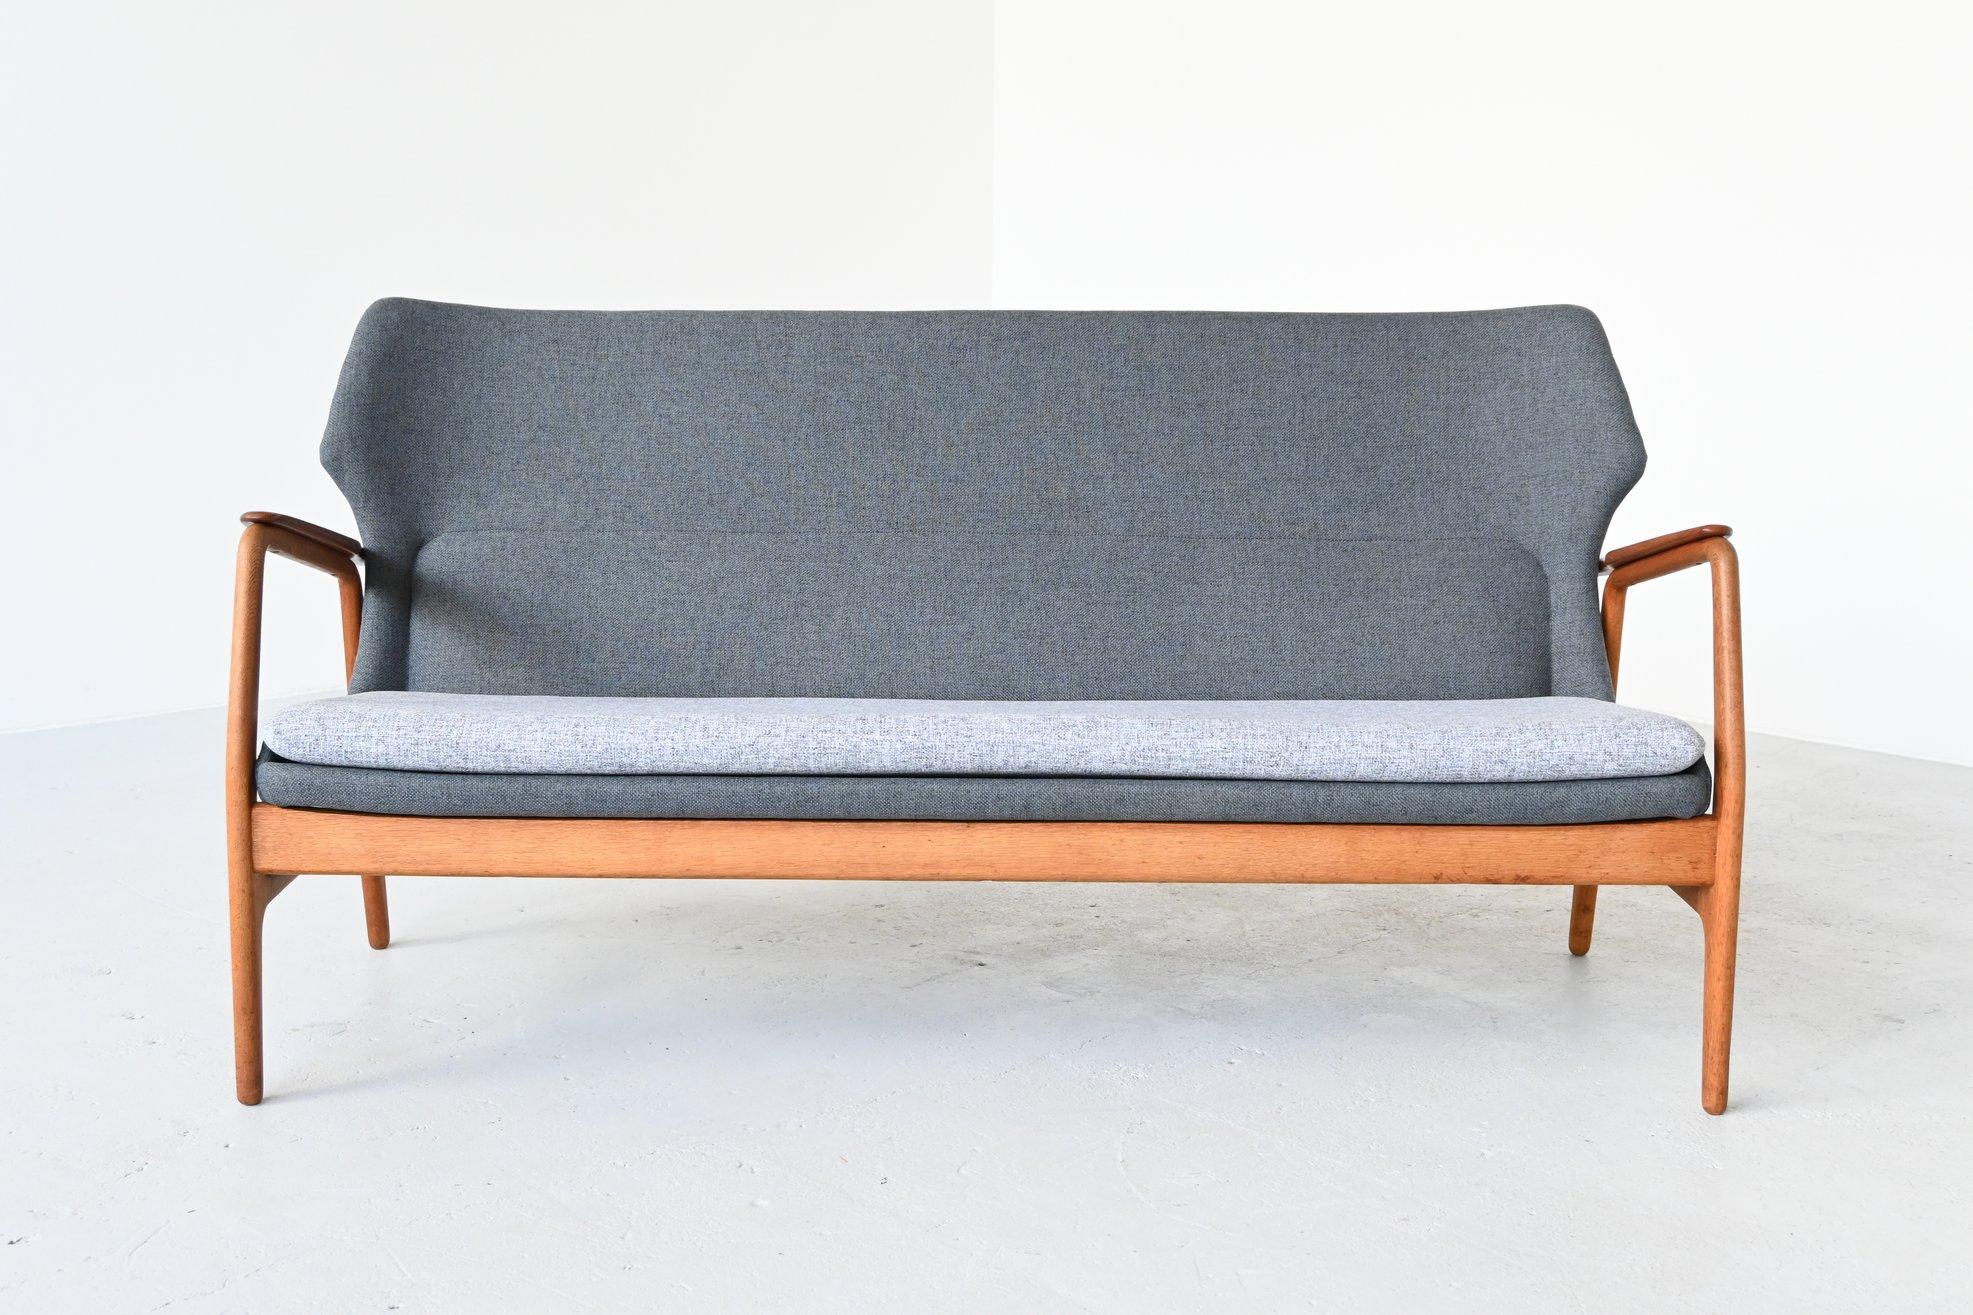 Fantastic shaped lounge sofa designed by Aksel Bender Madsen for Bovenkamp, the Netherlands, 1960. Bovenkamp was known for its high quality and Danish import furniture. This sofa is completely newly upholstered including new foam. We chose for a